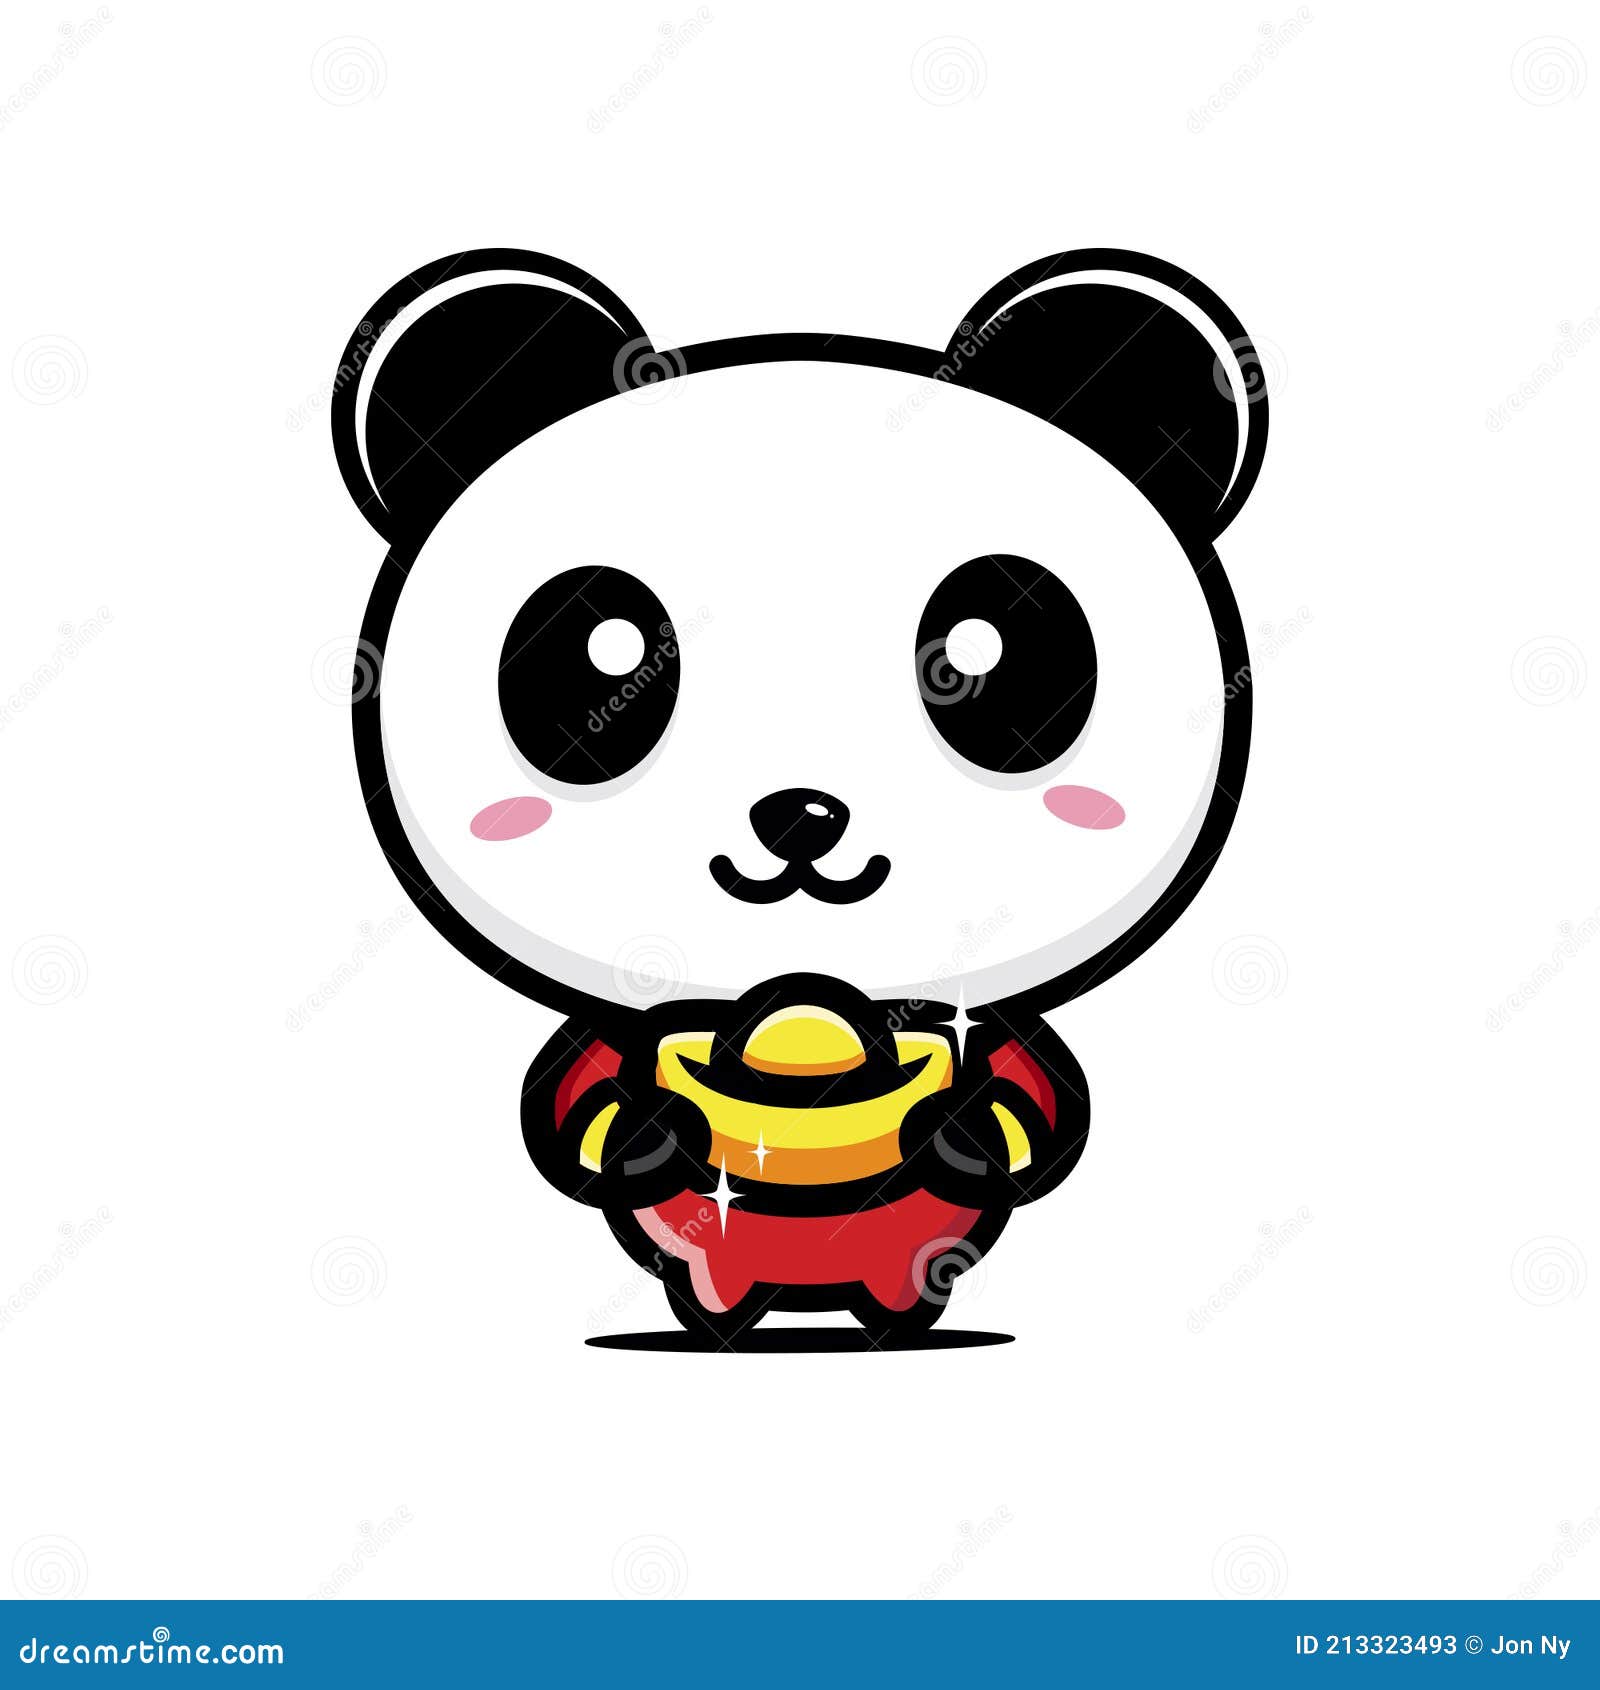 Cute Panda Animal Cartoon Characters Wearing Chinese New Year Costumes  while Carrying Gold Coins Stock Vector - Illustration of climbing, hairy:  213323493